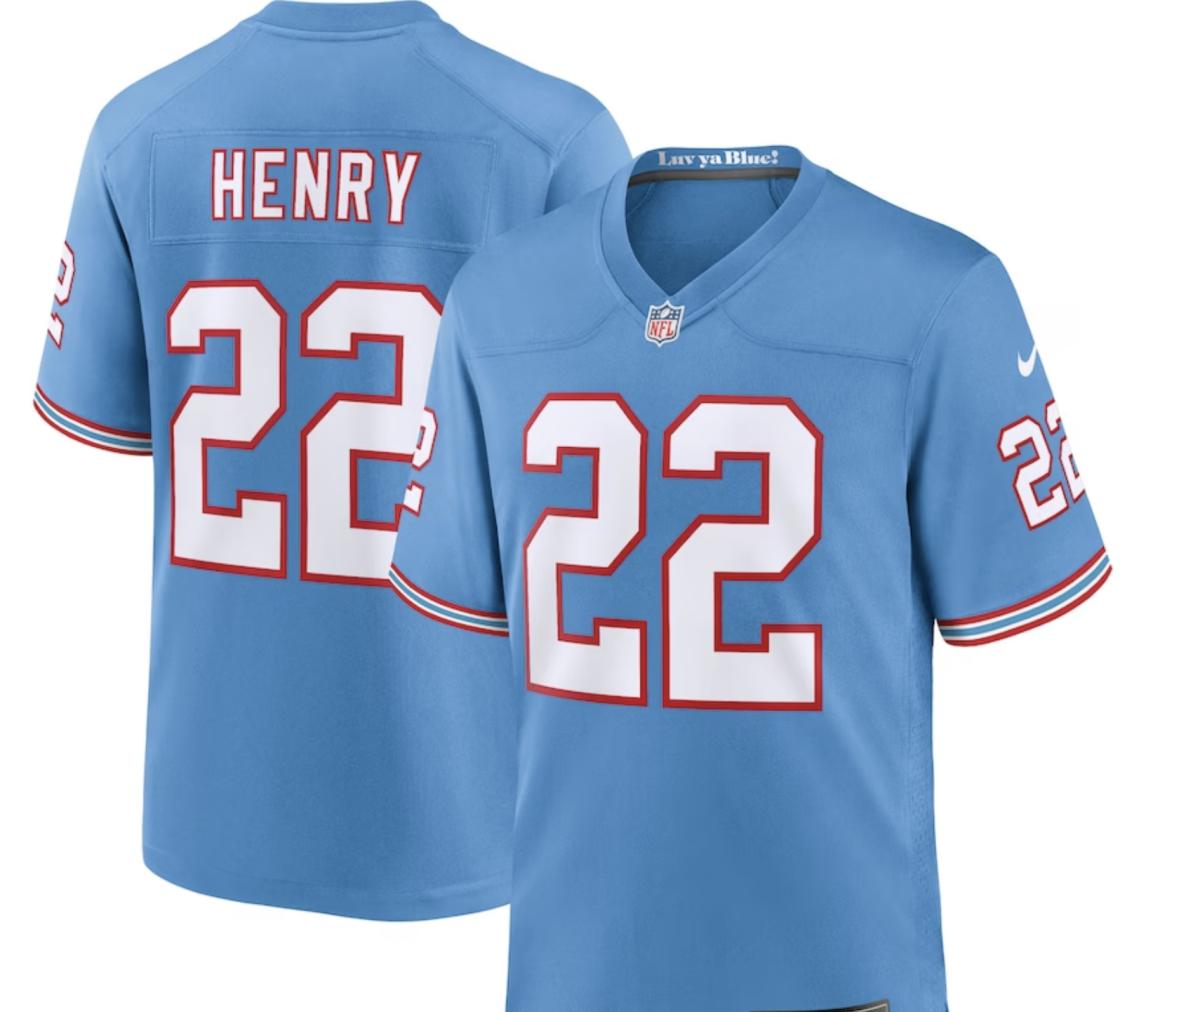 2023 Tennessee Titans: Oilers throwback alternate jerseys are now available  for purchase 